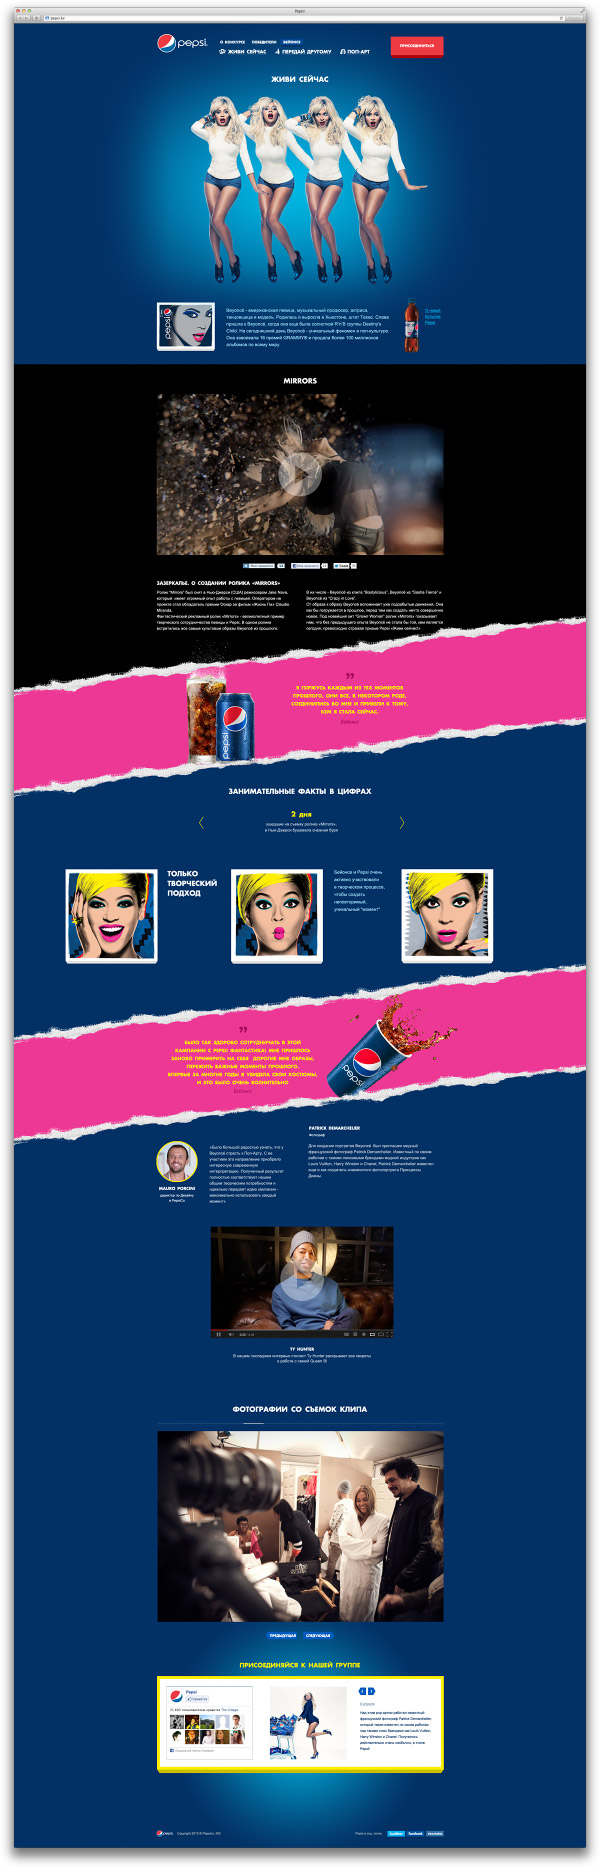 Long animated page tells about Pepsi role in Beyonce's life